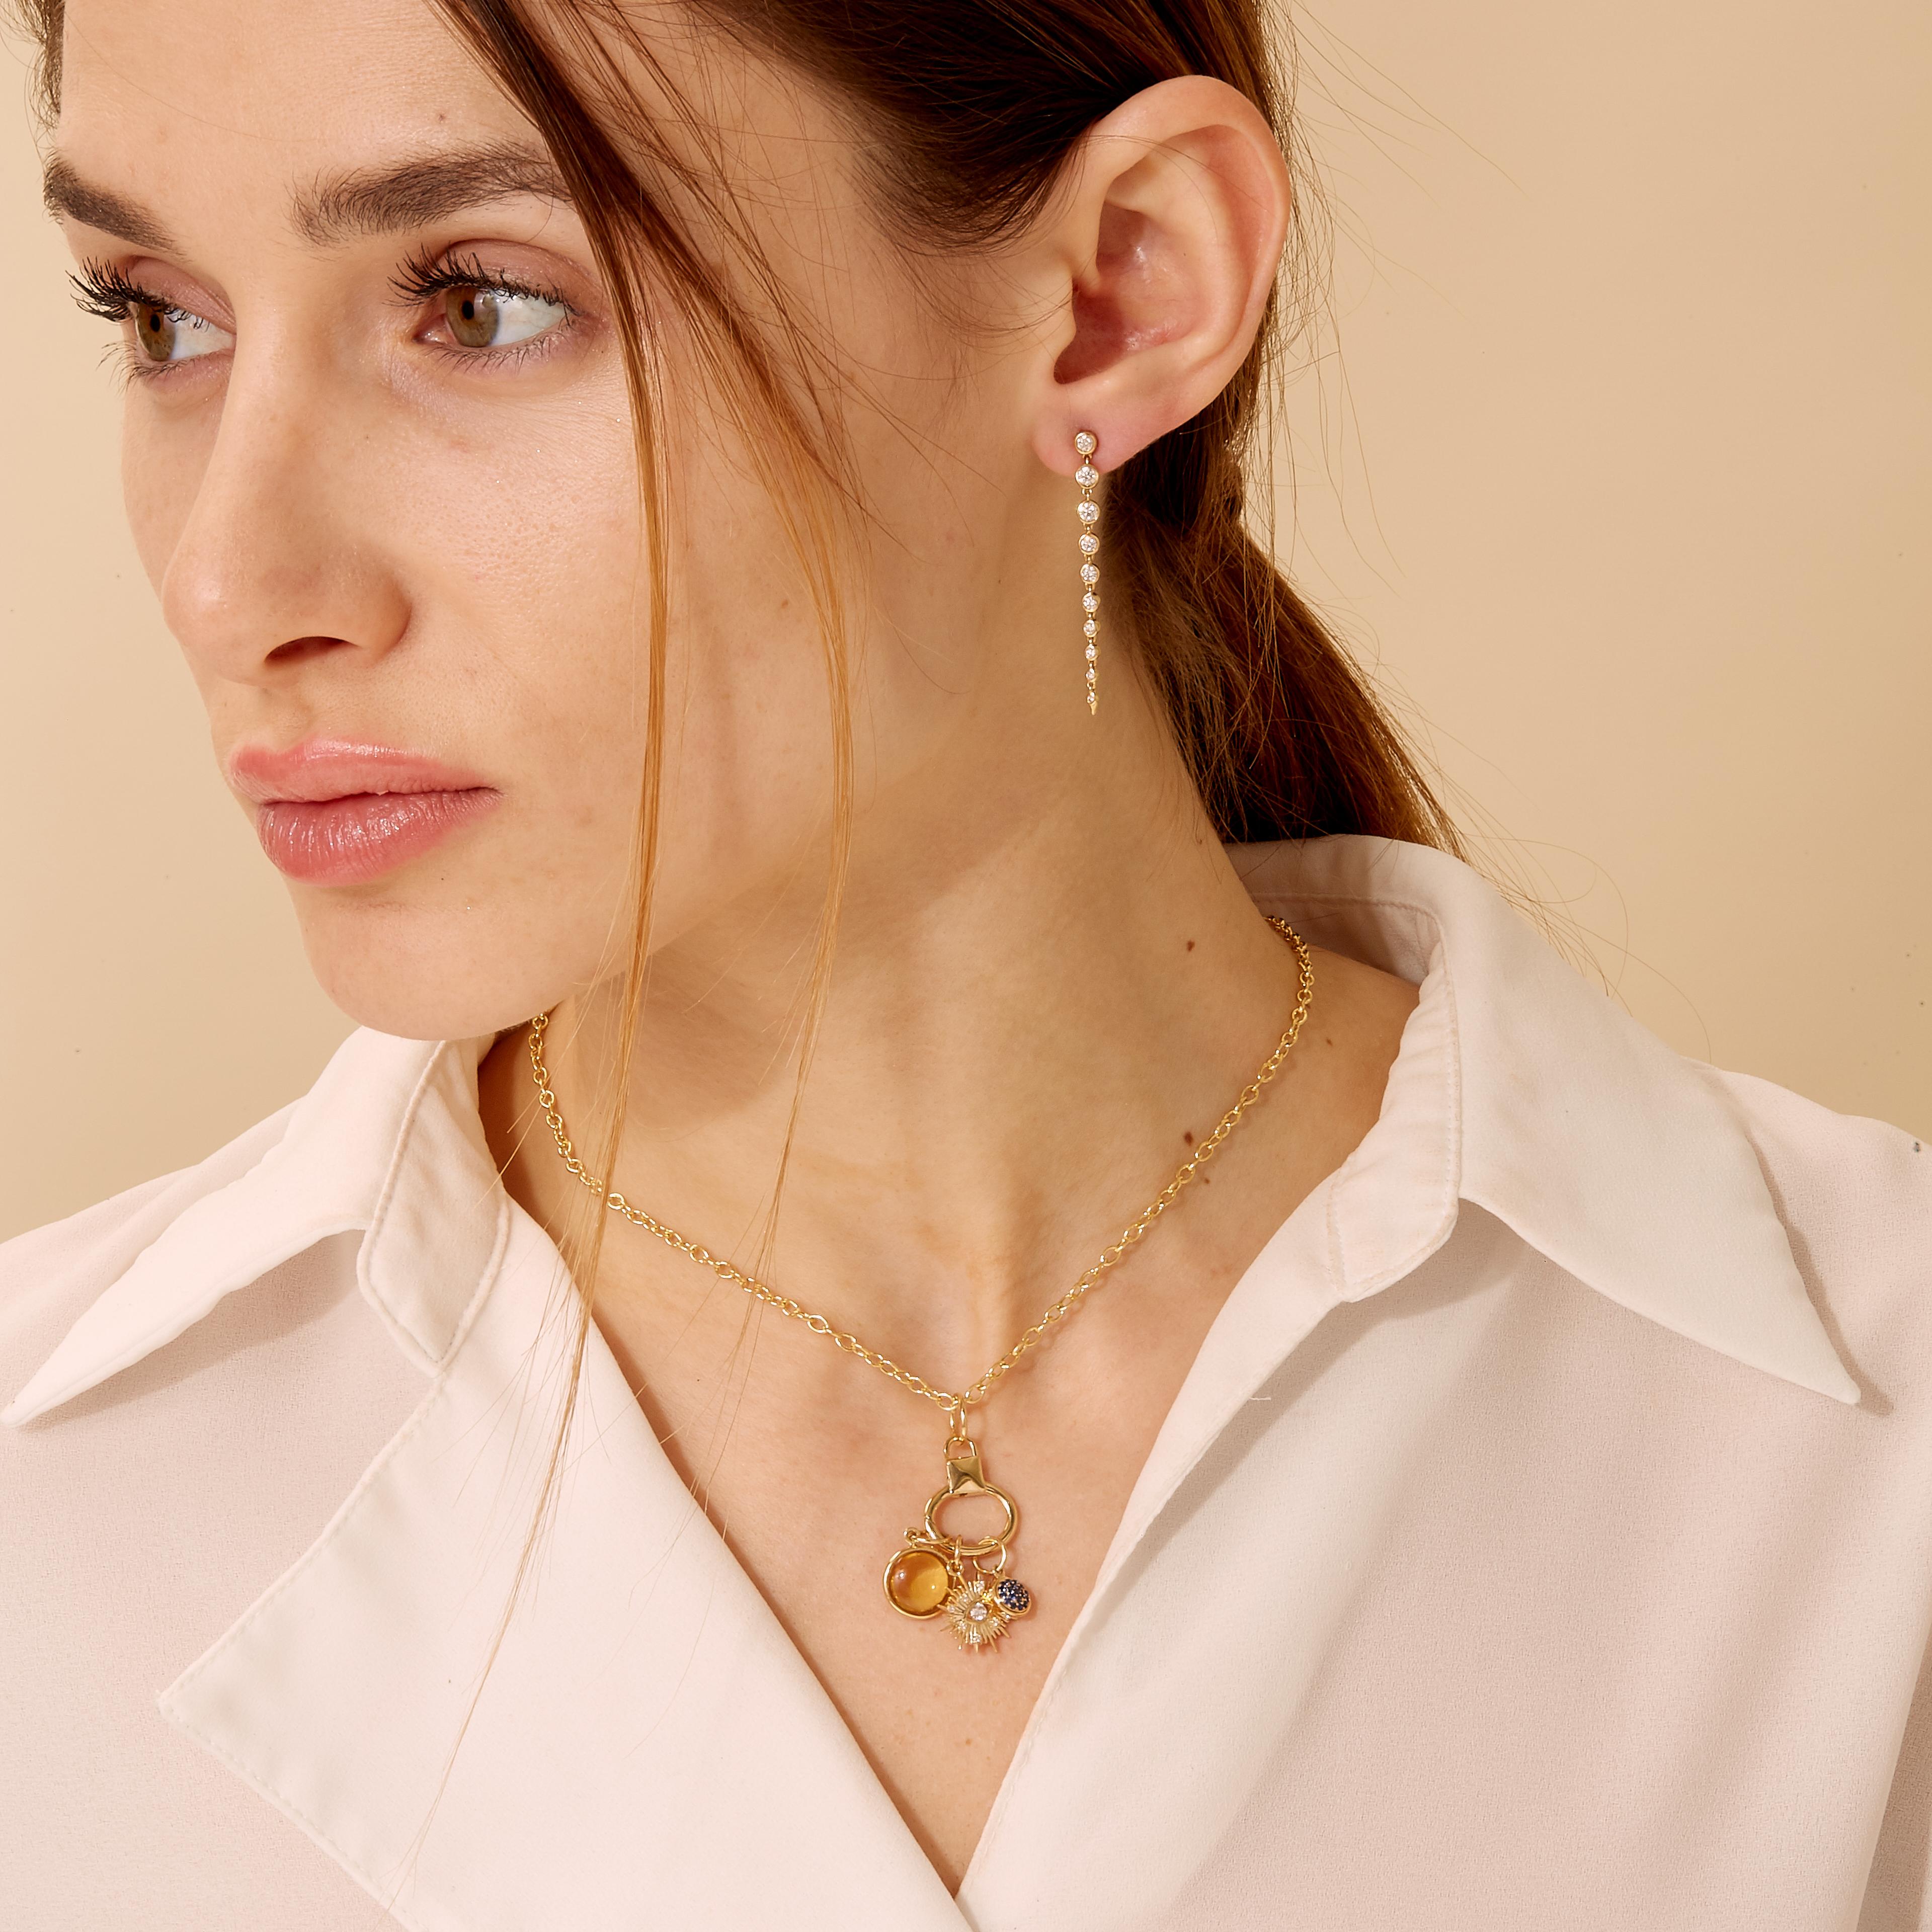 Created in 18 karat yellow gold
Citrine 3.50 carats approx.
Blue sapphire 0.10 carat approx.
Champagne diamonds 0.10 carat approx.
18 inch, adjustable at 16-17
Limited edition

Crafted from 18 karat yellow gold, this limited edition necklace